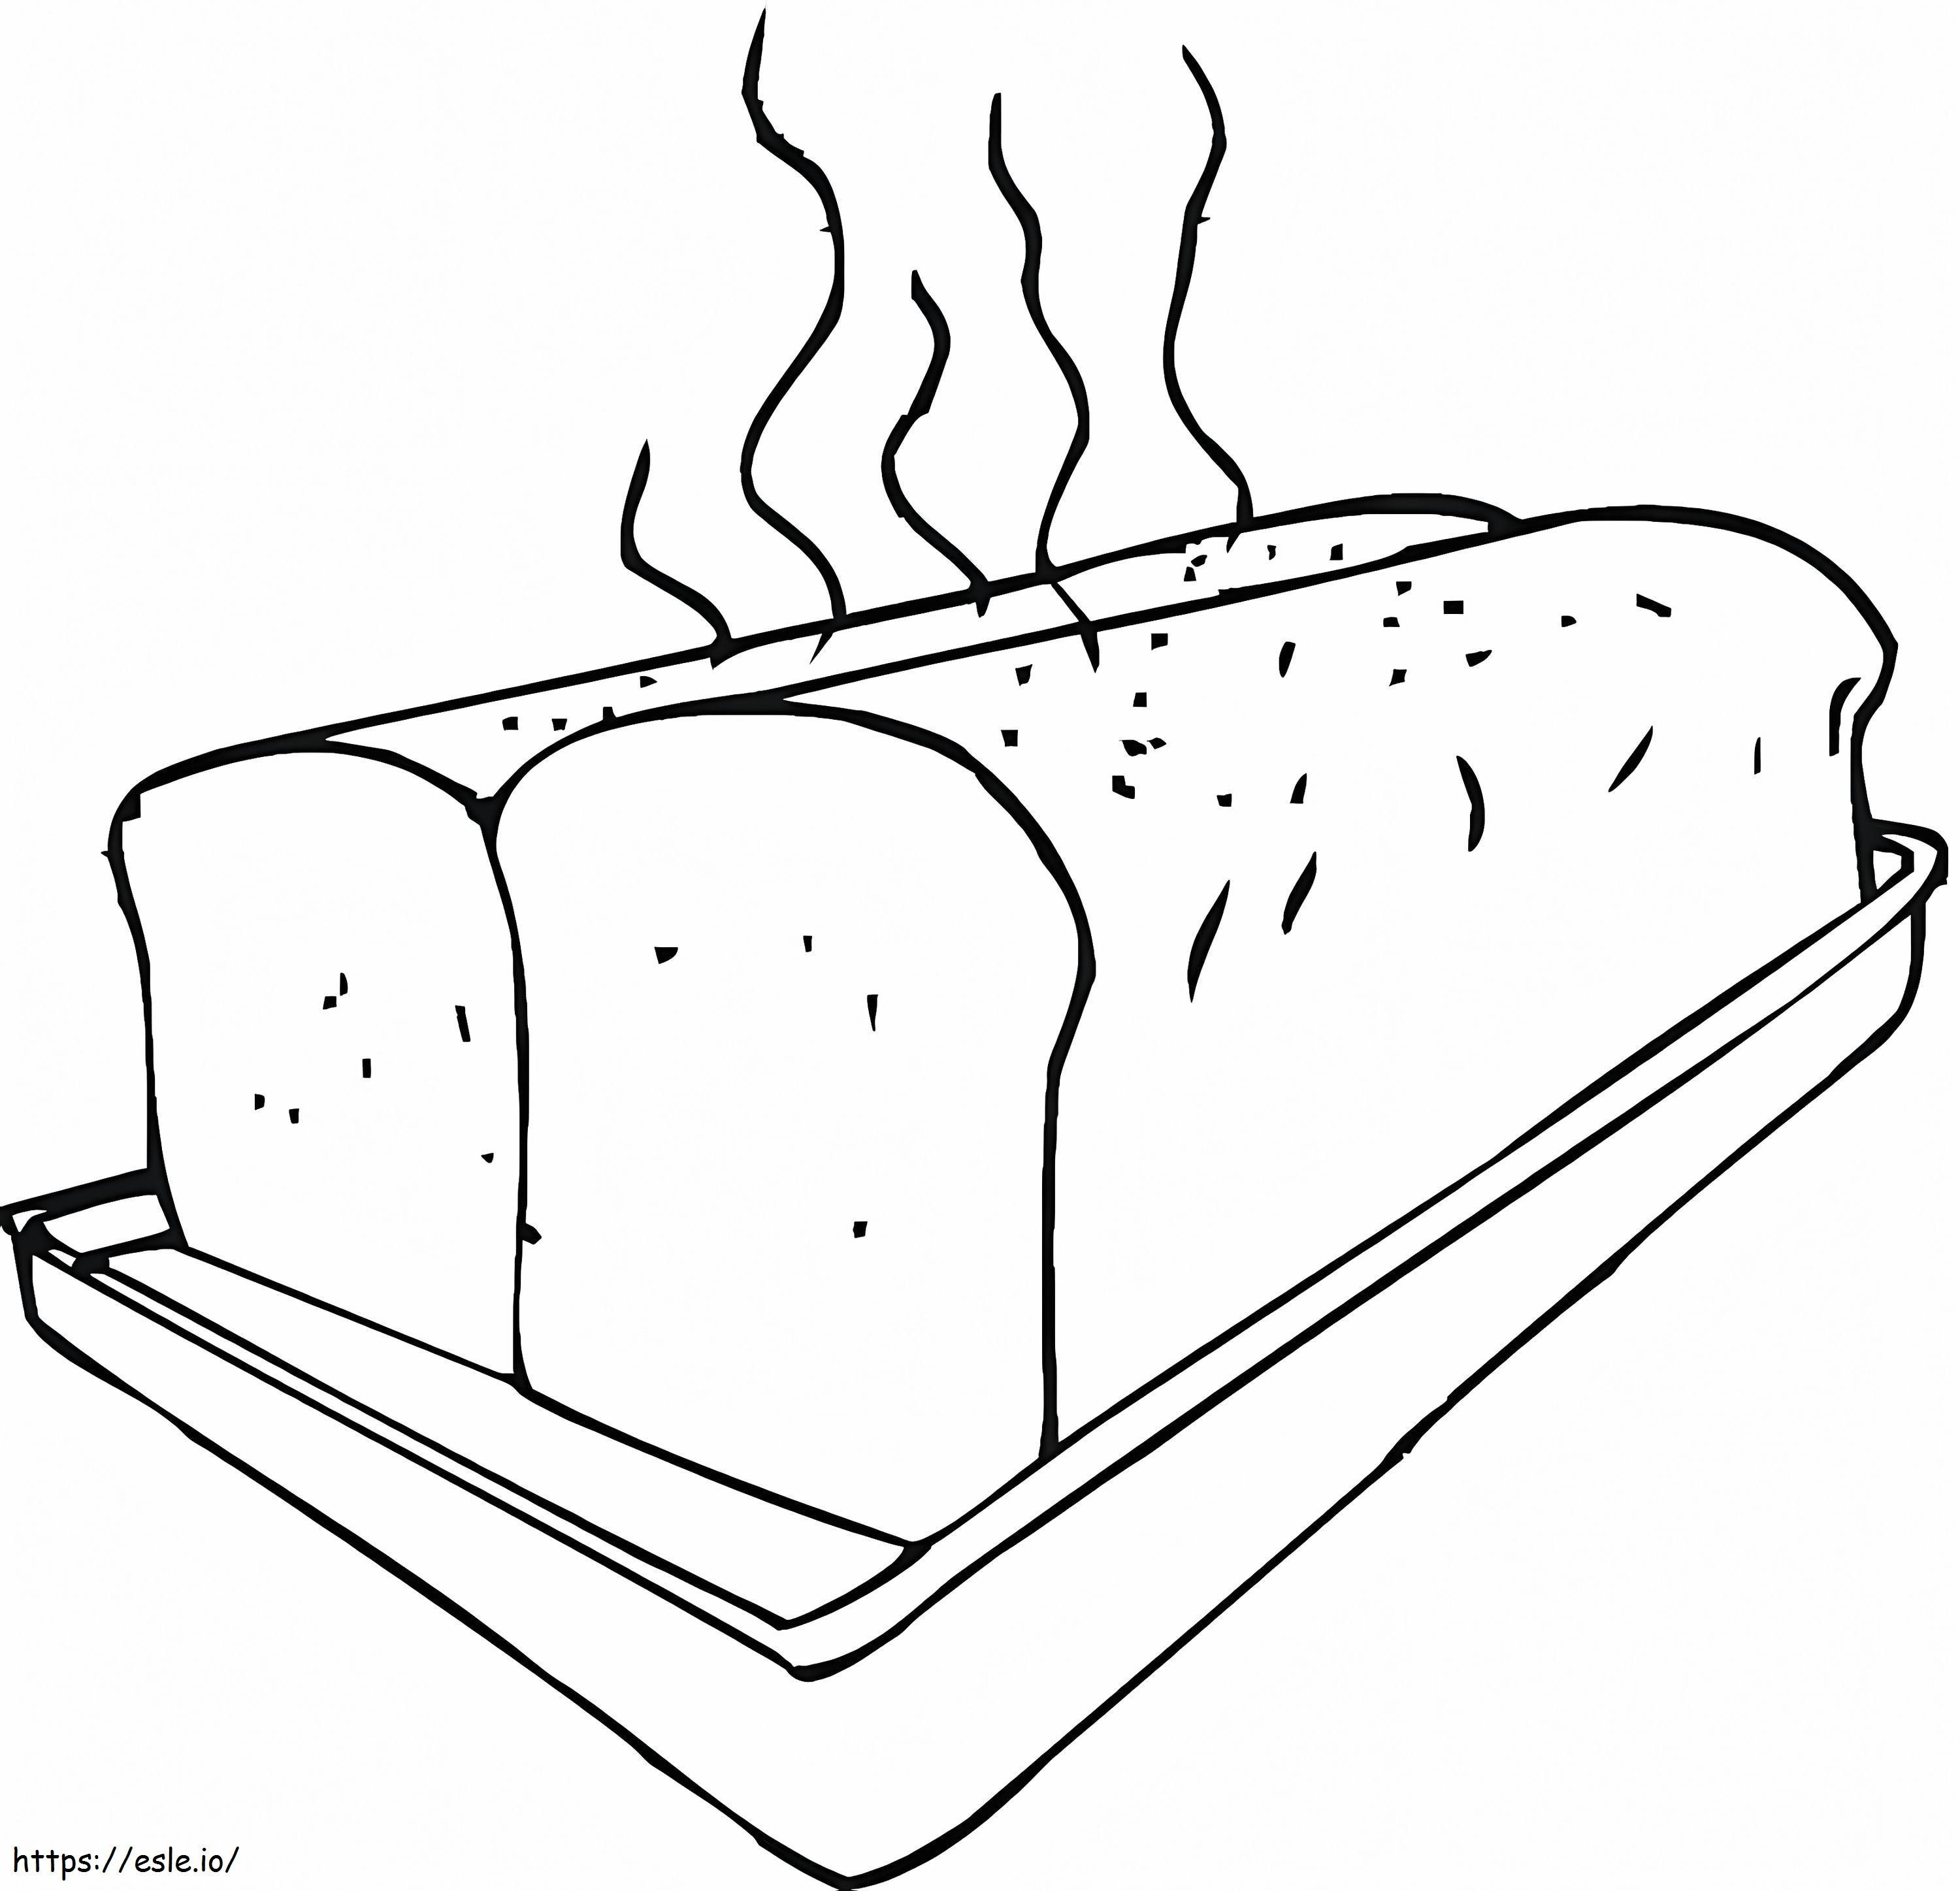 Hot Bread coloring page